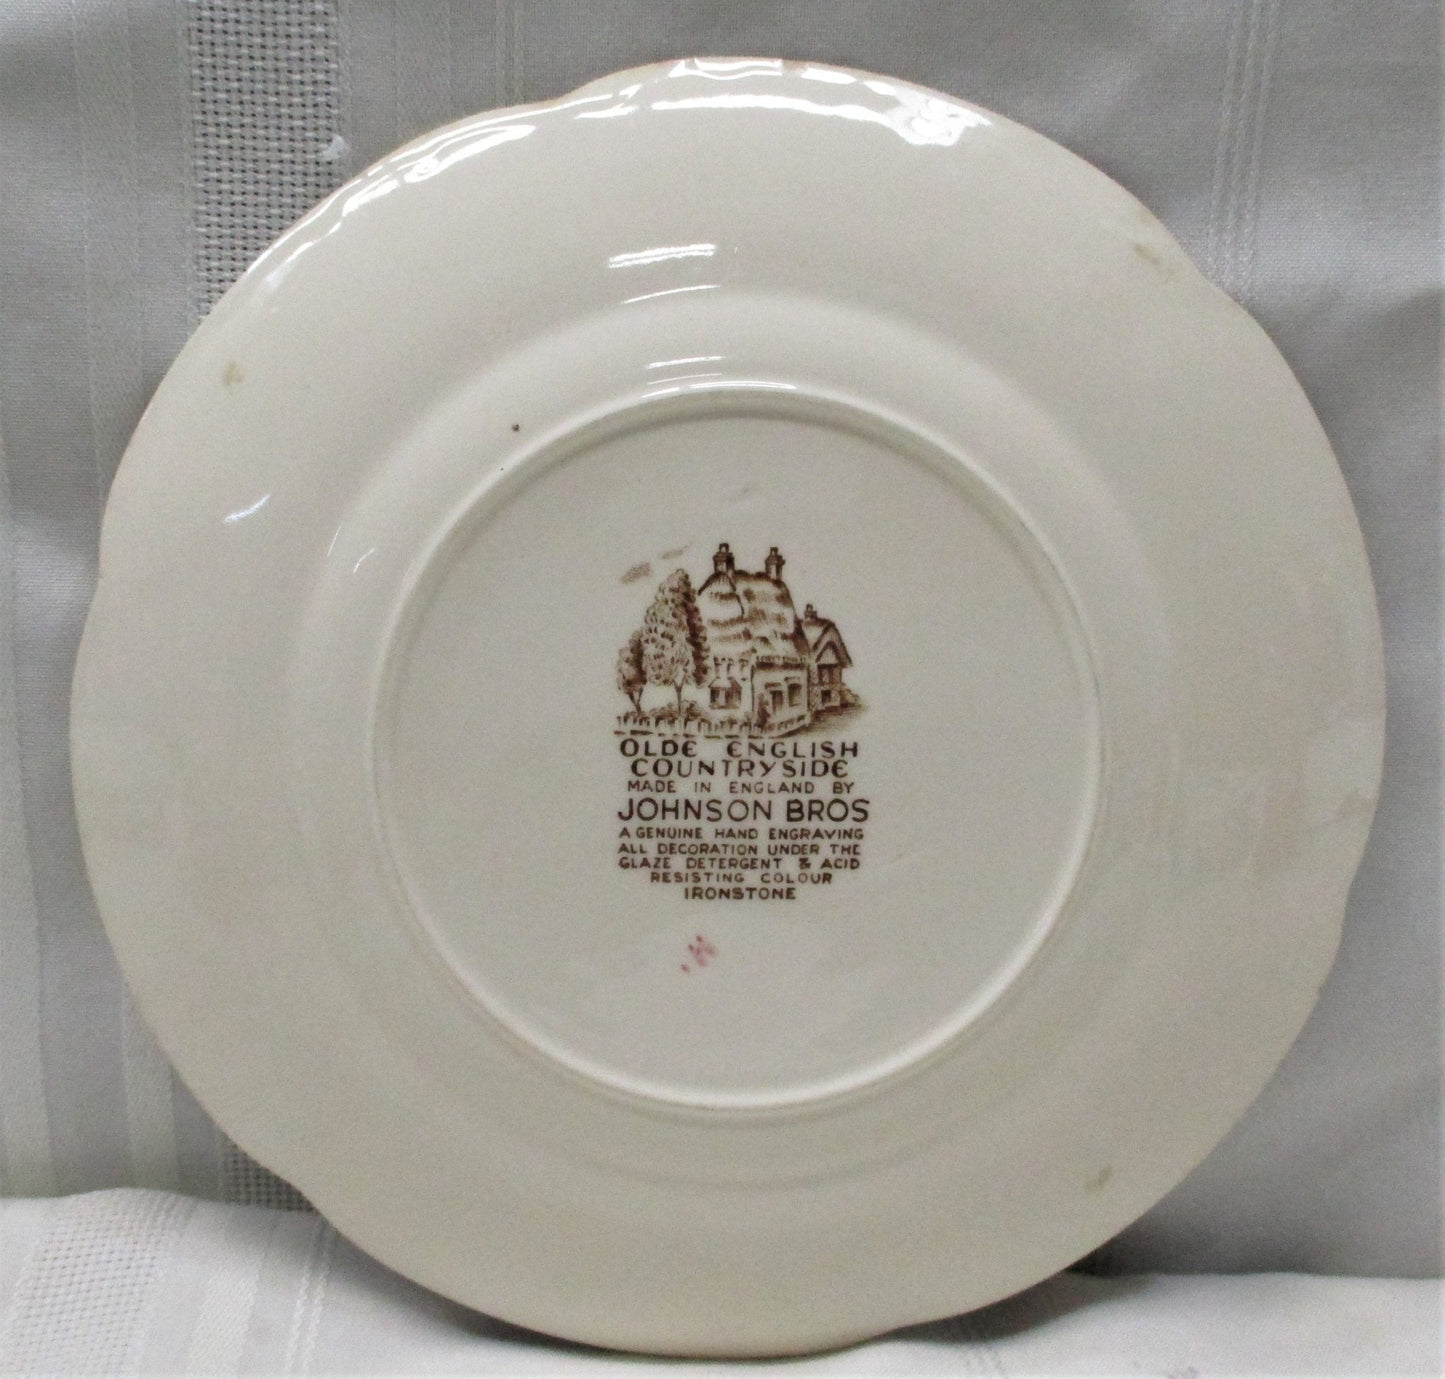 Olde English Countryside Plate 7 3/4" (74717 - Cactus Jax Unique Collectibles